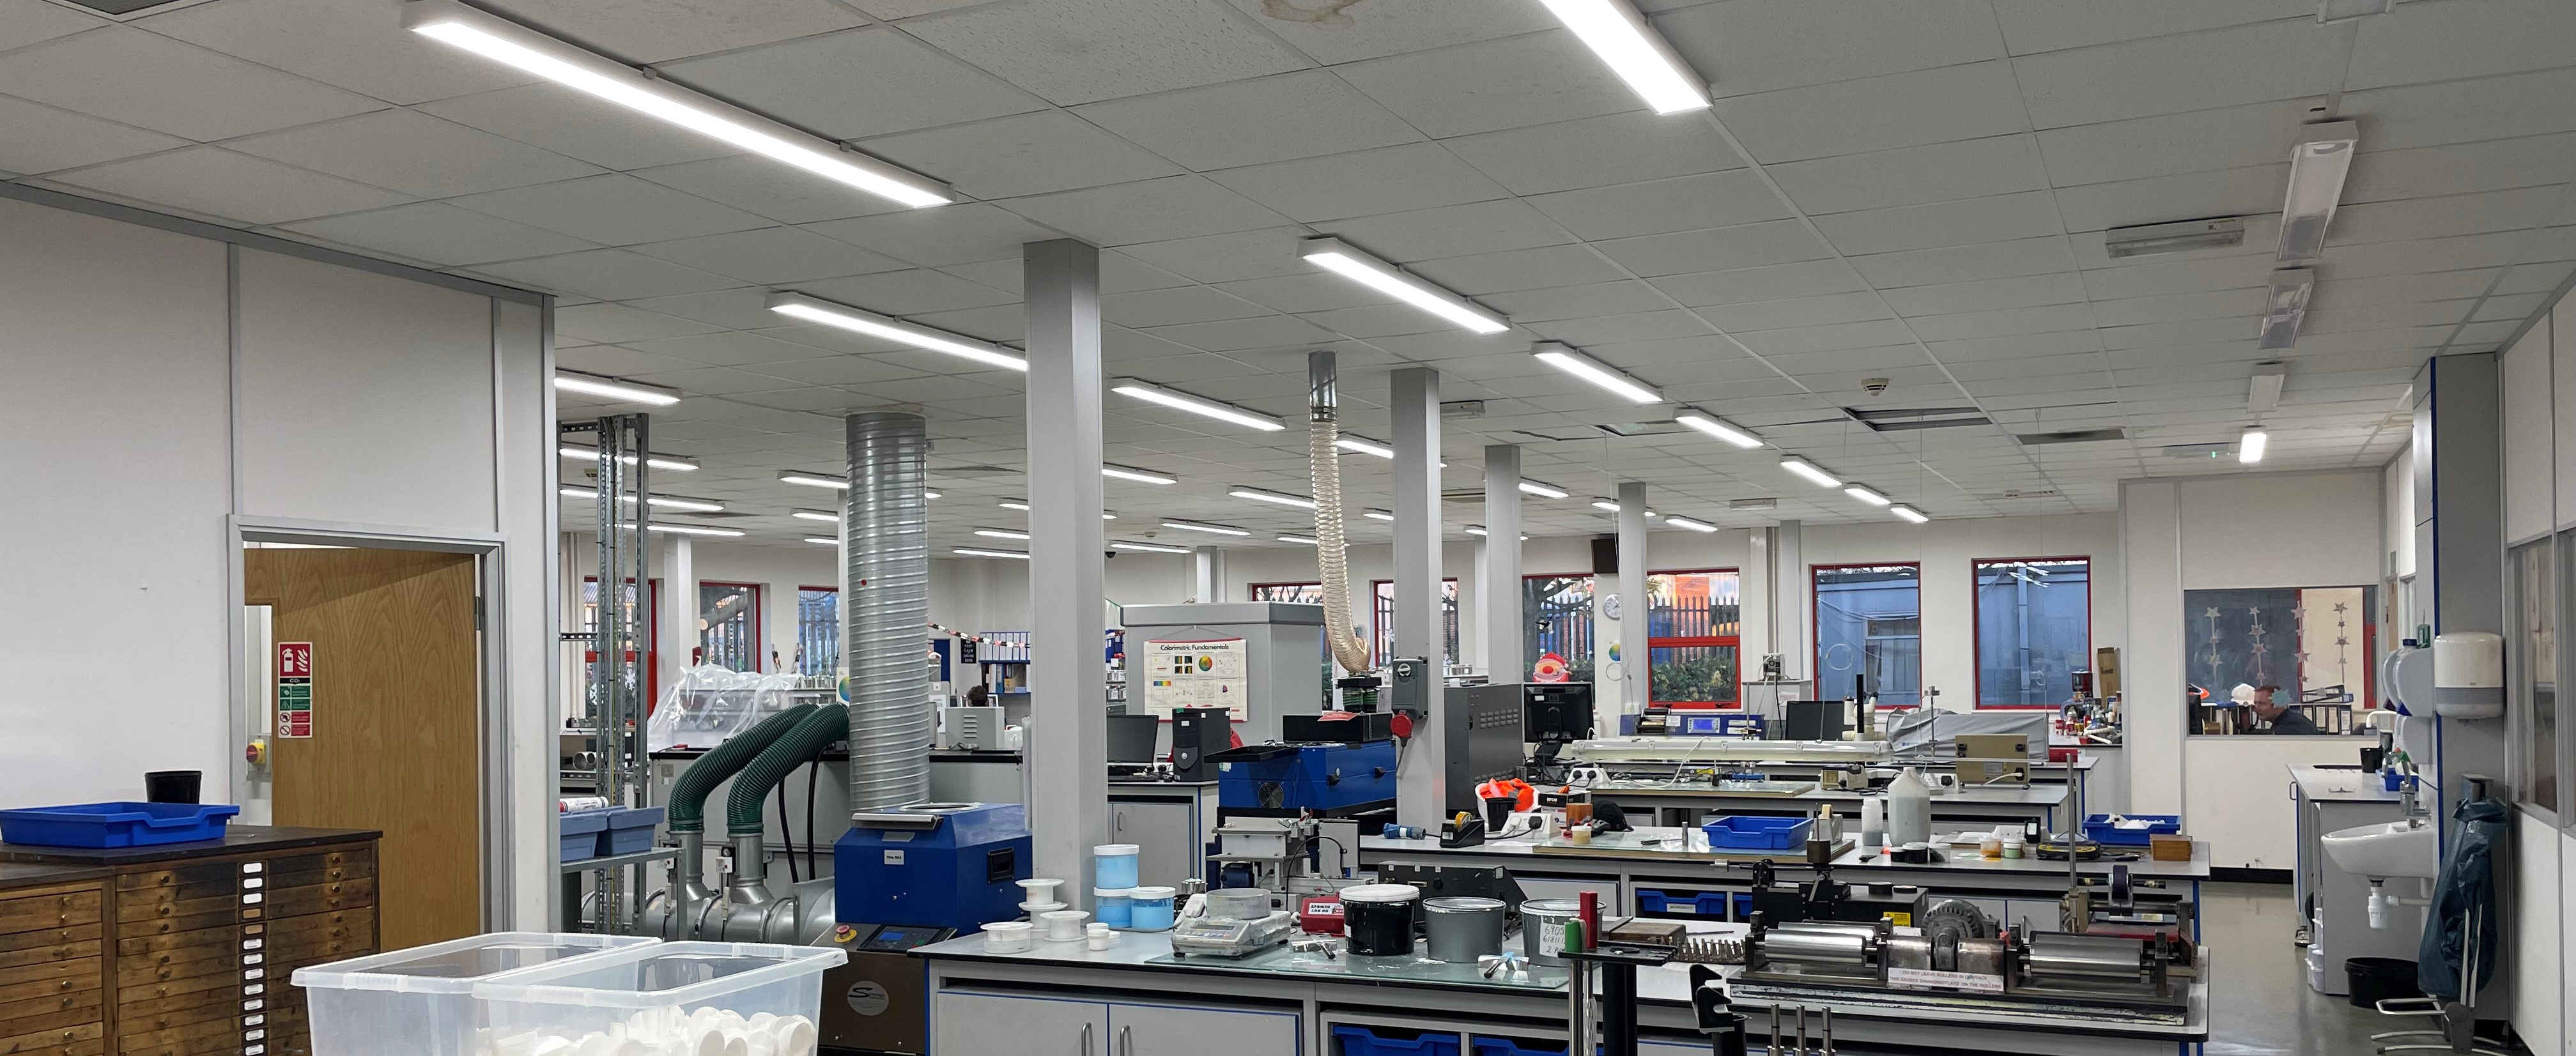 AkzoNobel, coatings specialists in Hull, uk recieve LED lighting upgrade in their testing laboratories.